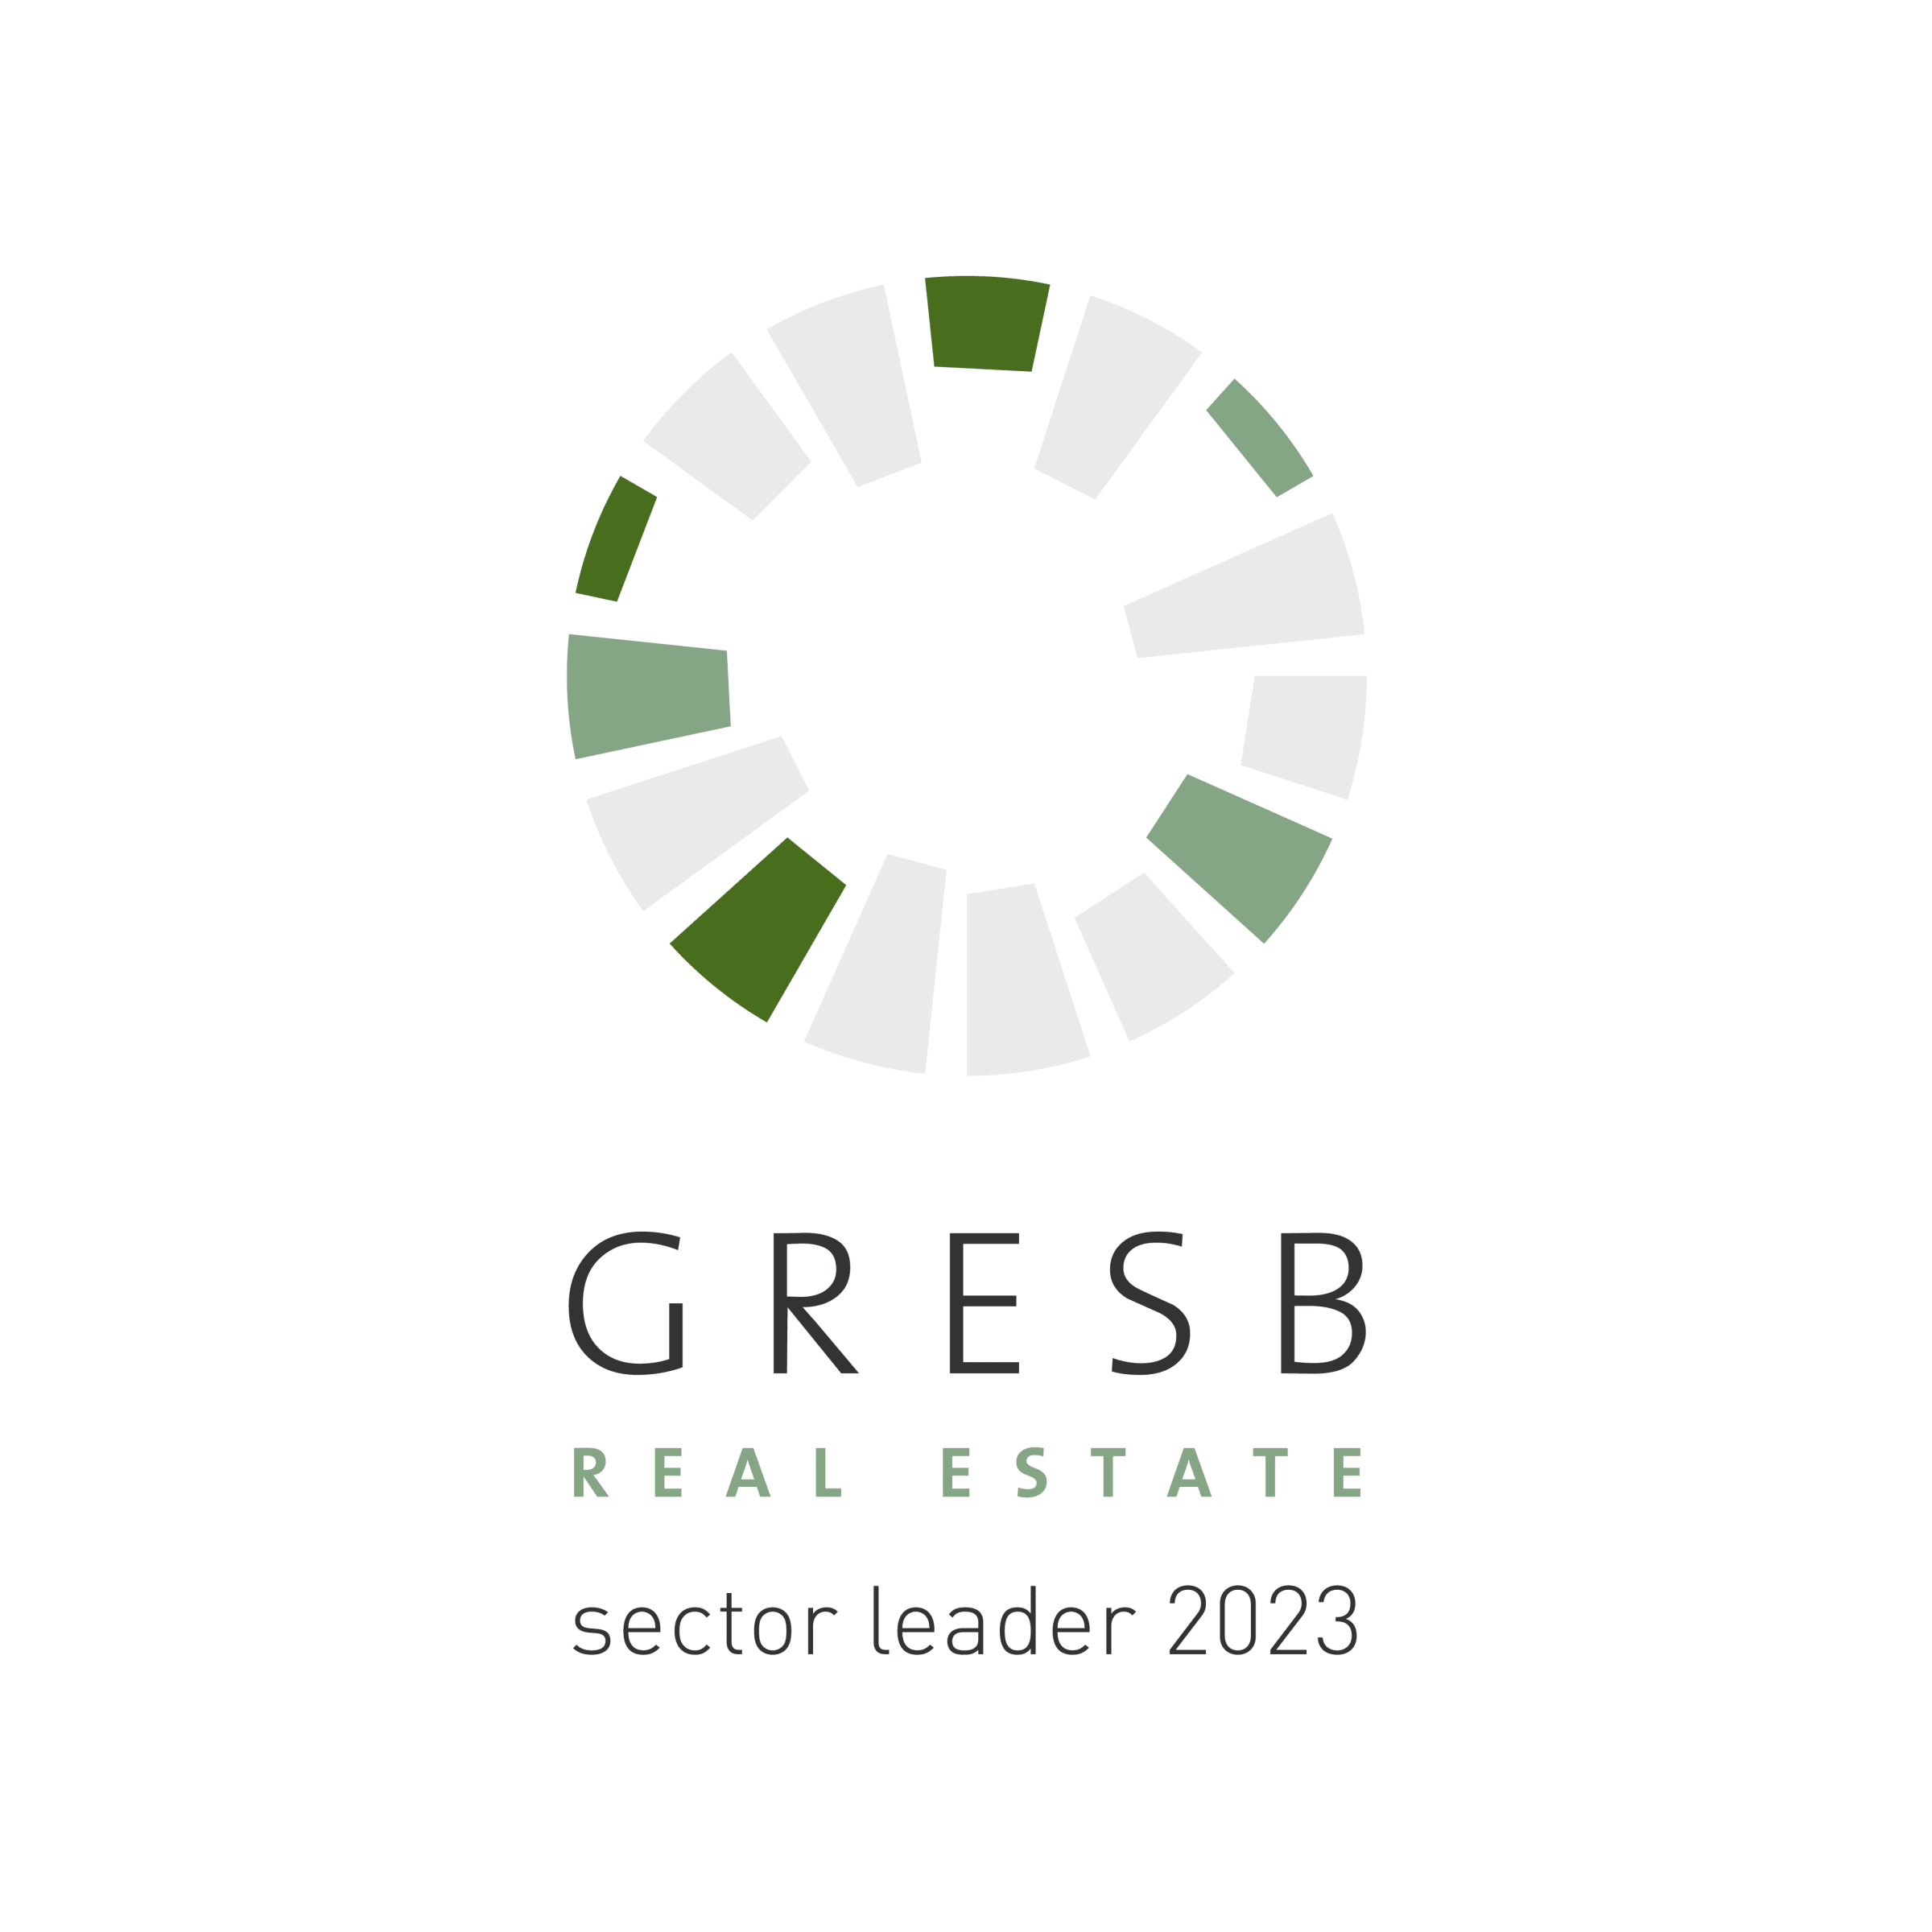 We are Global Sector Leader, Development in the 2023 GRESB Real Estate Assessment.